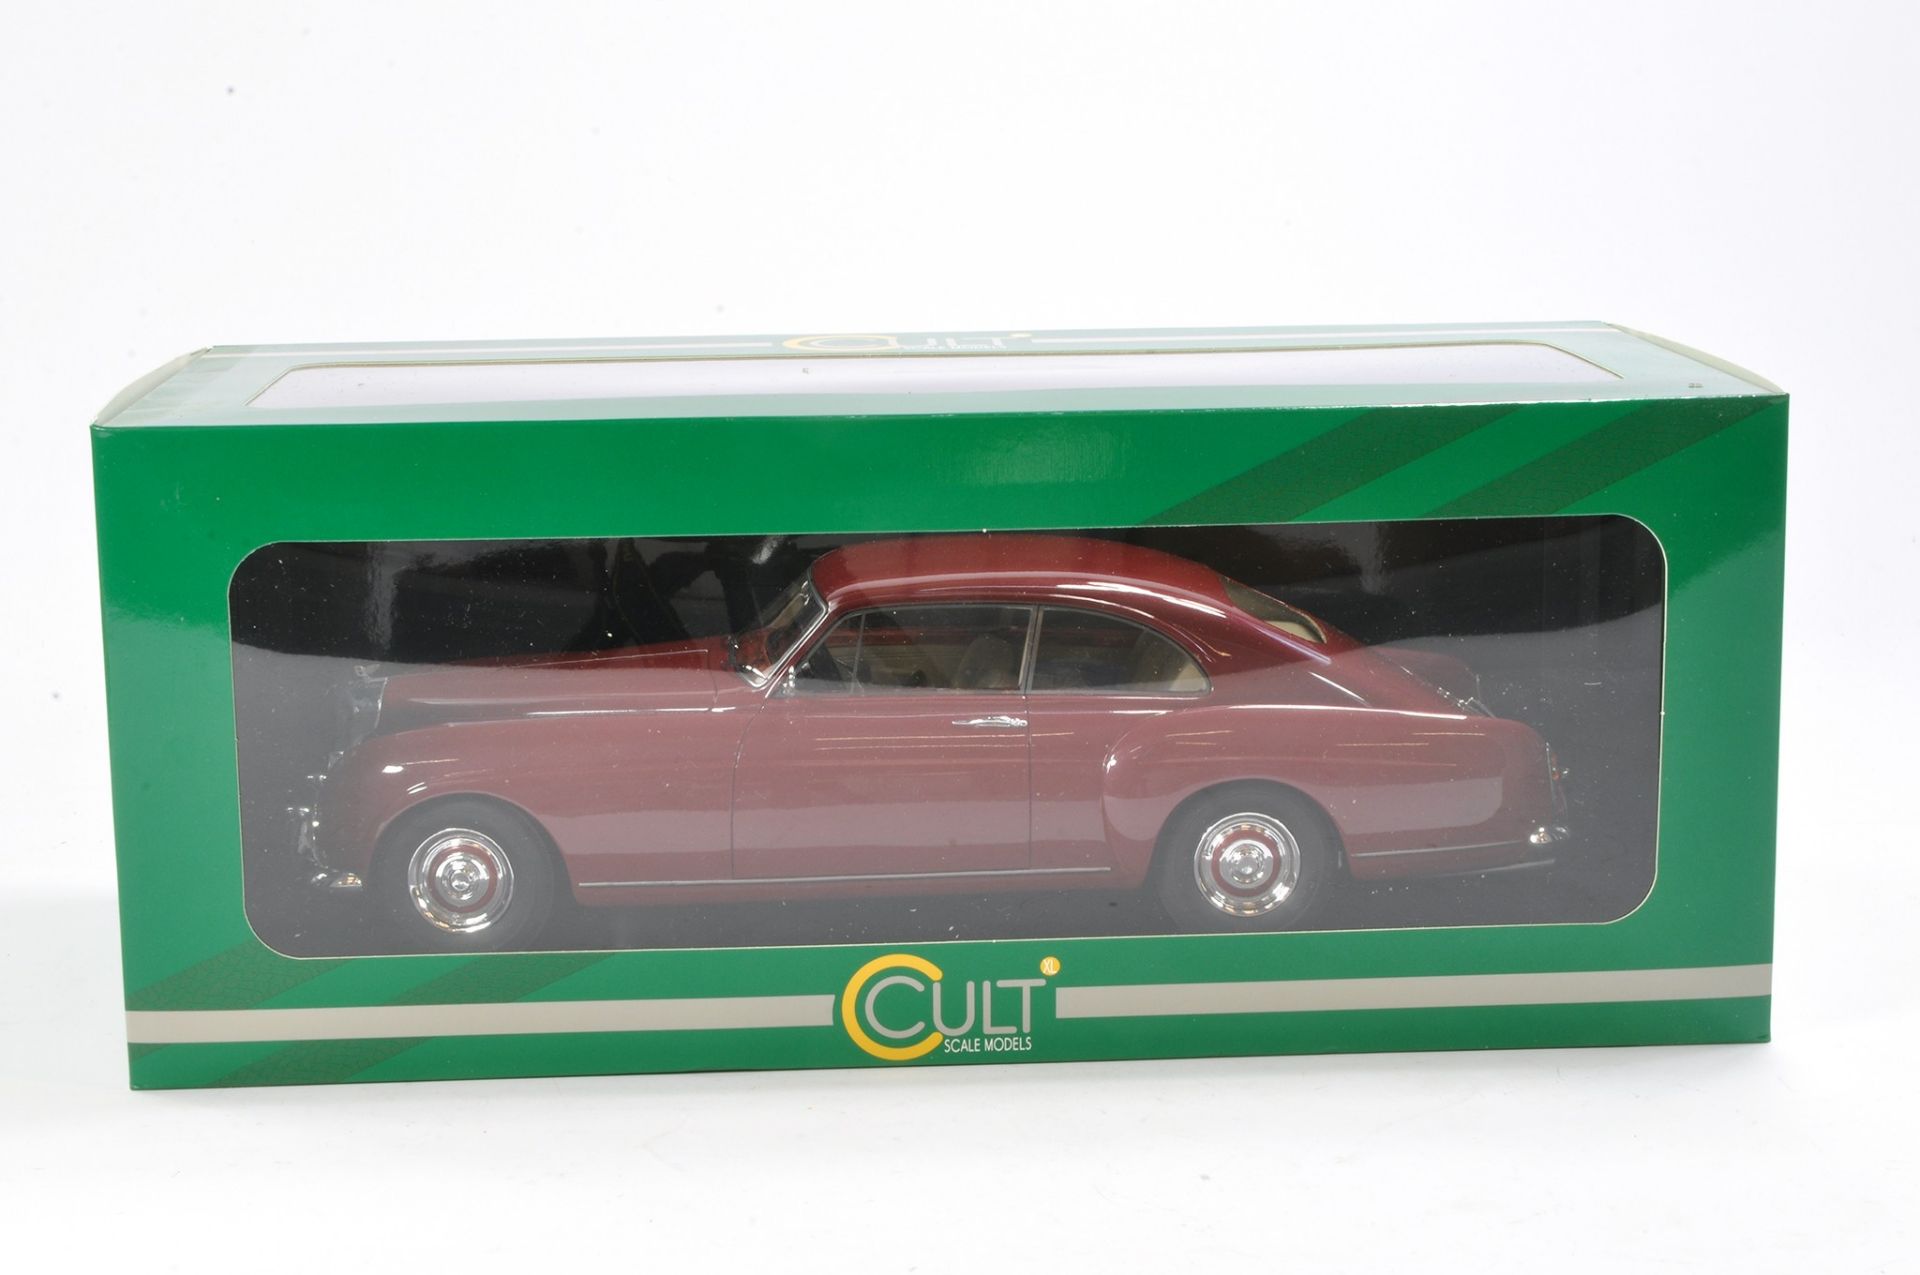 Cult Scale Models 1/18 No. CML023-1 Bentley S1 Continental Fastback Coupe - Red Metallic. Ex Bentley